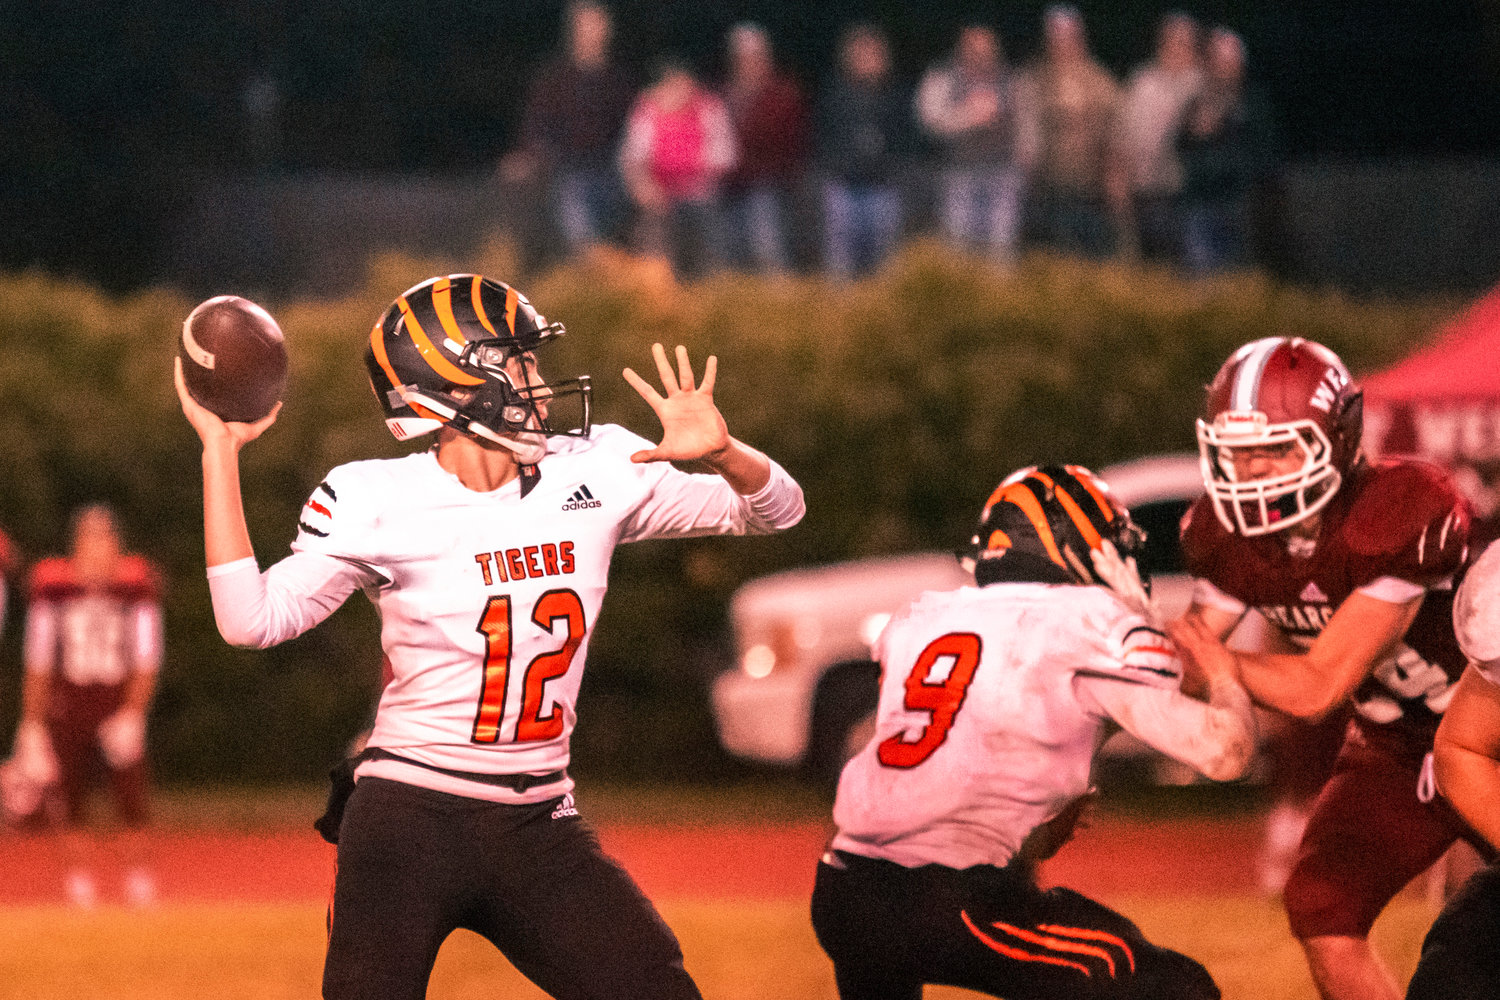 Centralia’s Quarterback Tommy Billings (12) looks to throw during the Swamp Cup game Friday night in Chehalis.